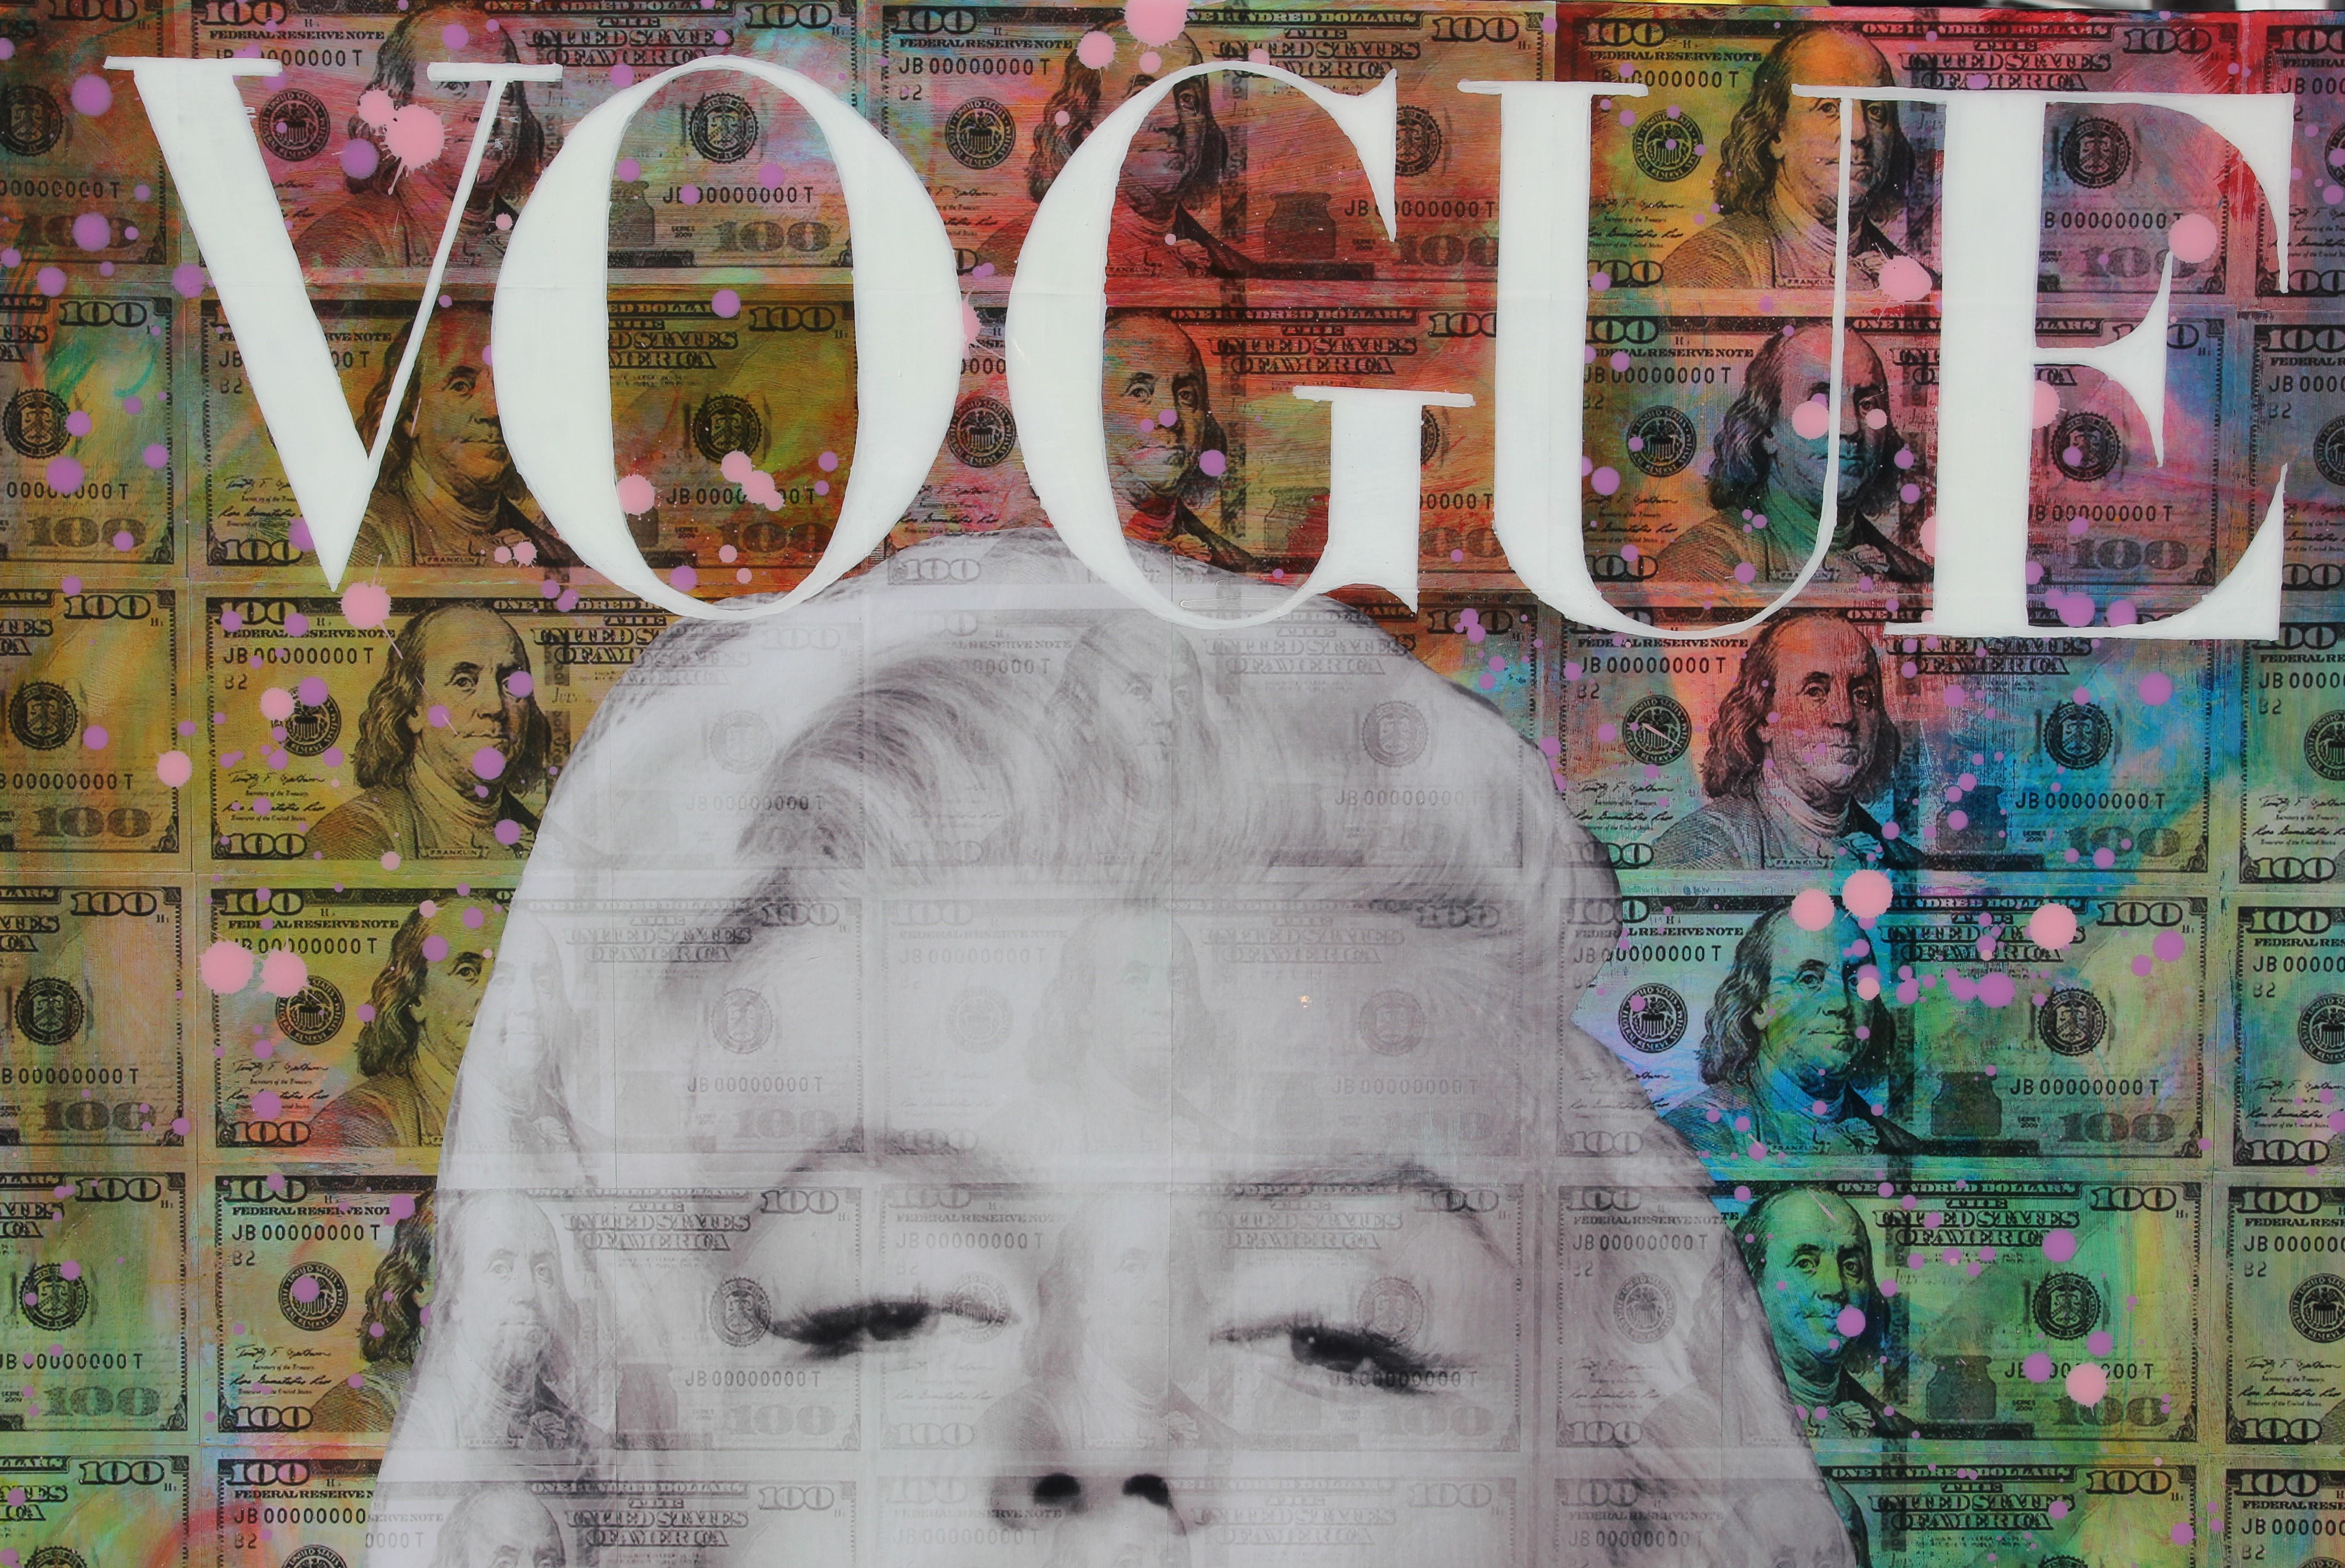 1950's pop icon Marilyn Monroe with Vogue and 100 dollar bills in the background all encased in resin. The work is signed by the artist in the bottom corner of the canvas. Jim Hudek is an emerging artist in the Texas region and Houston Texas. A